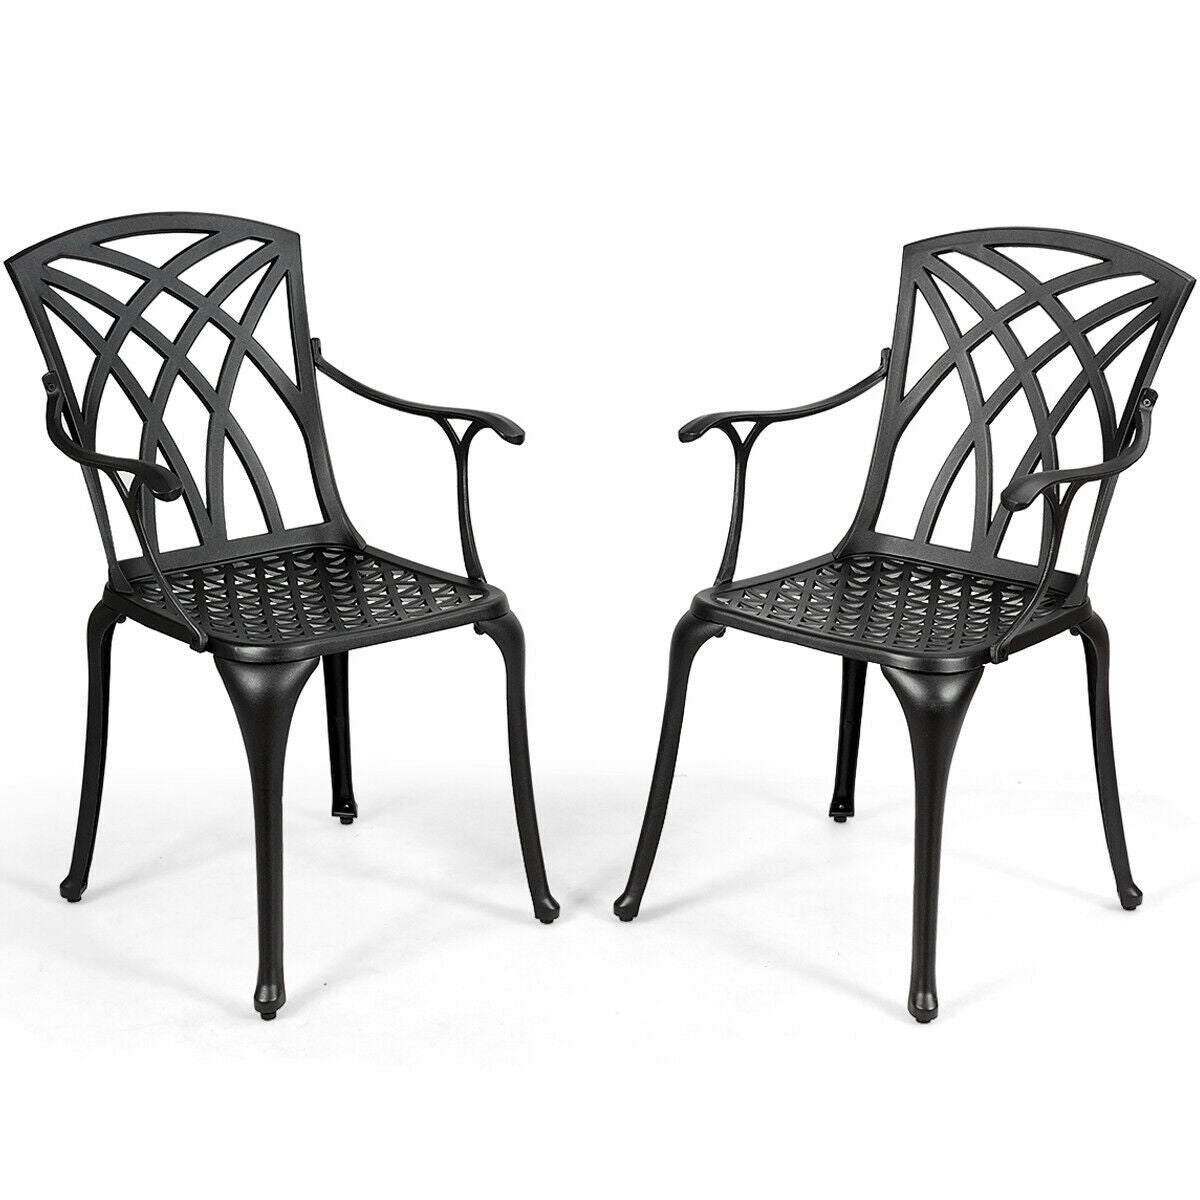 Set of 2 Outdoor Dining Chairs, Cast Aluminum Chairs with Armrest